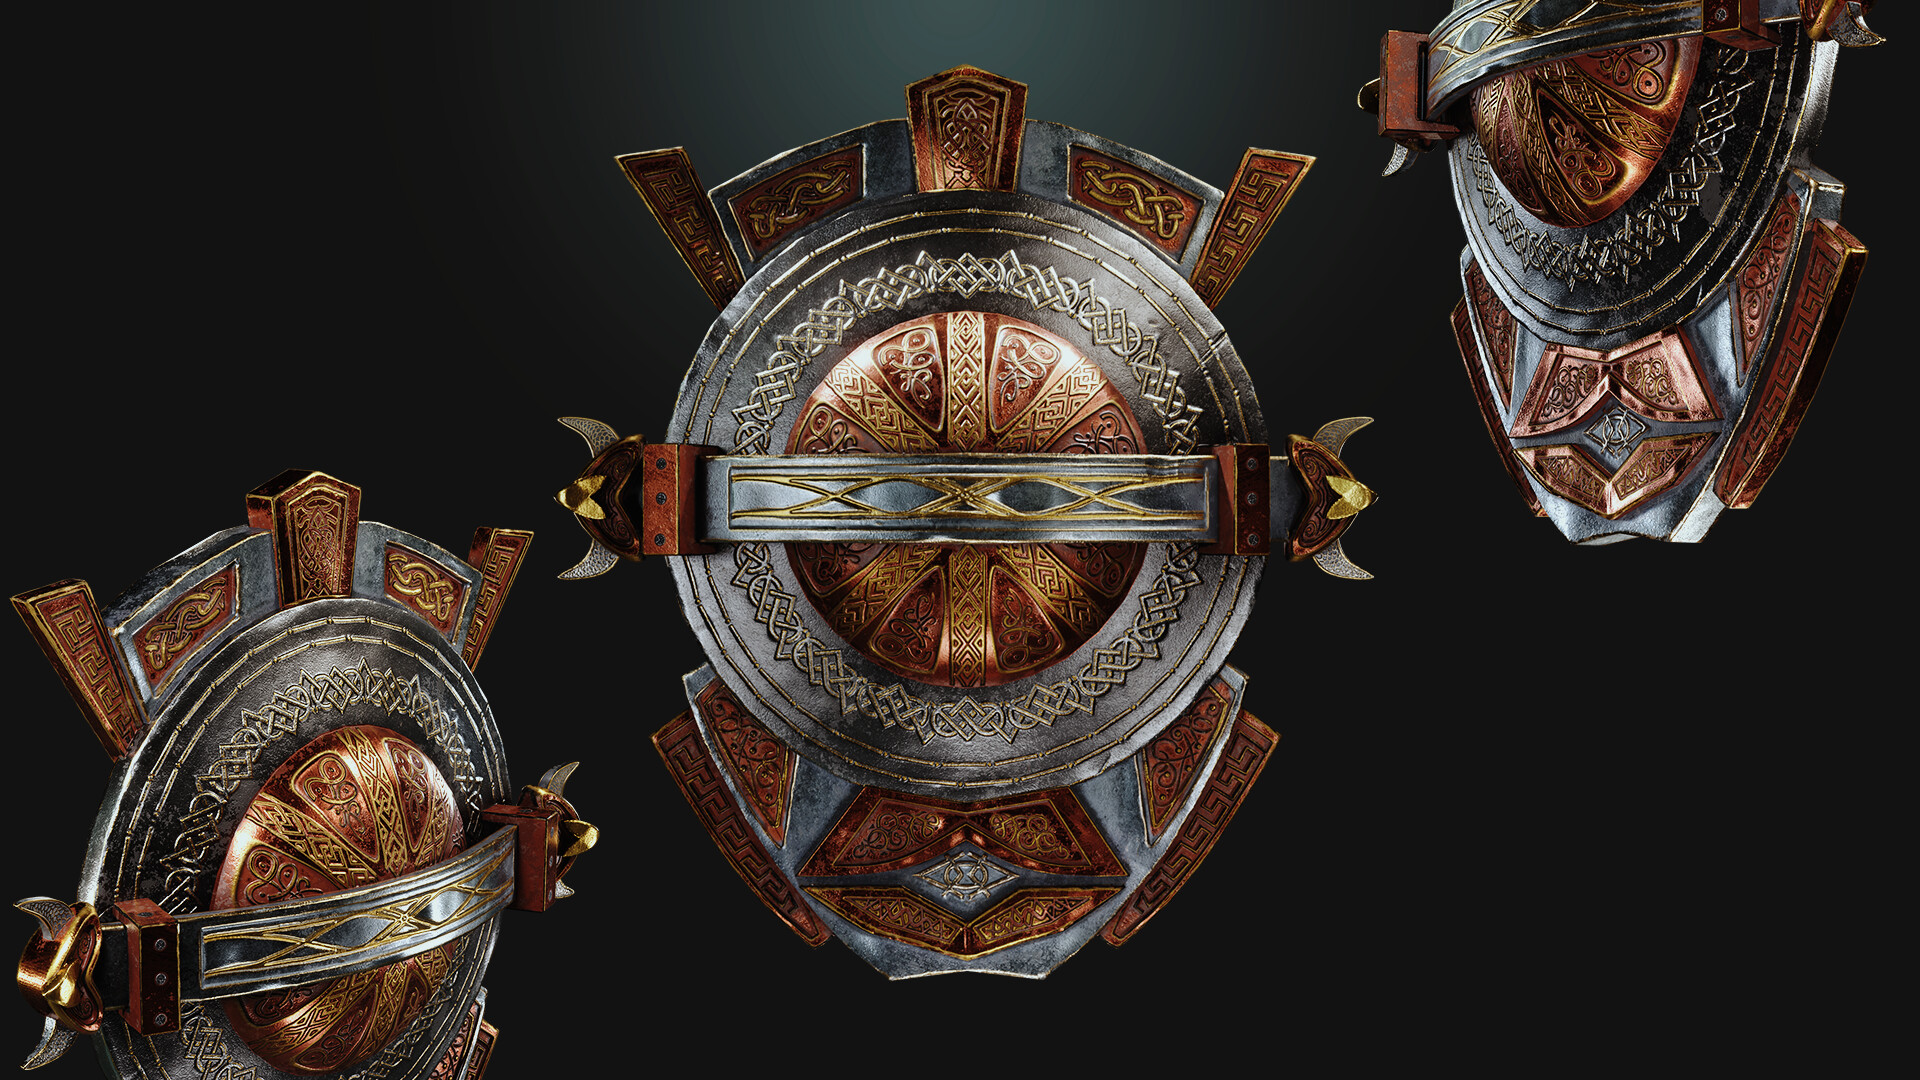 Shield 9. Stylized Weapon. Рыцари щит исторический артефакт. Epic Knights: Shields, Armor and Weapons крафты. Crypto Weapon stylized.